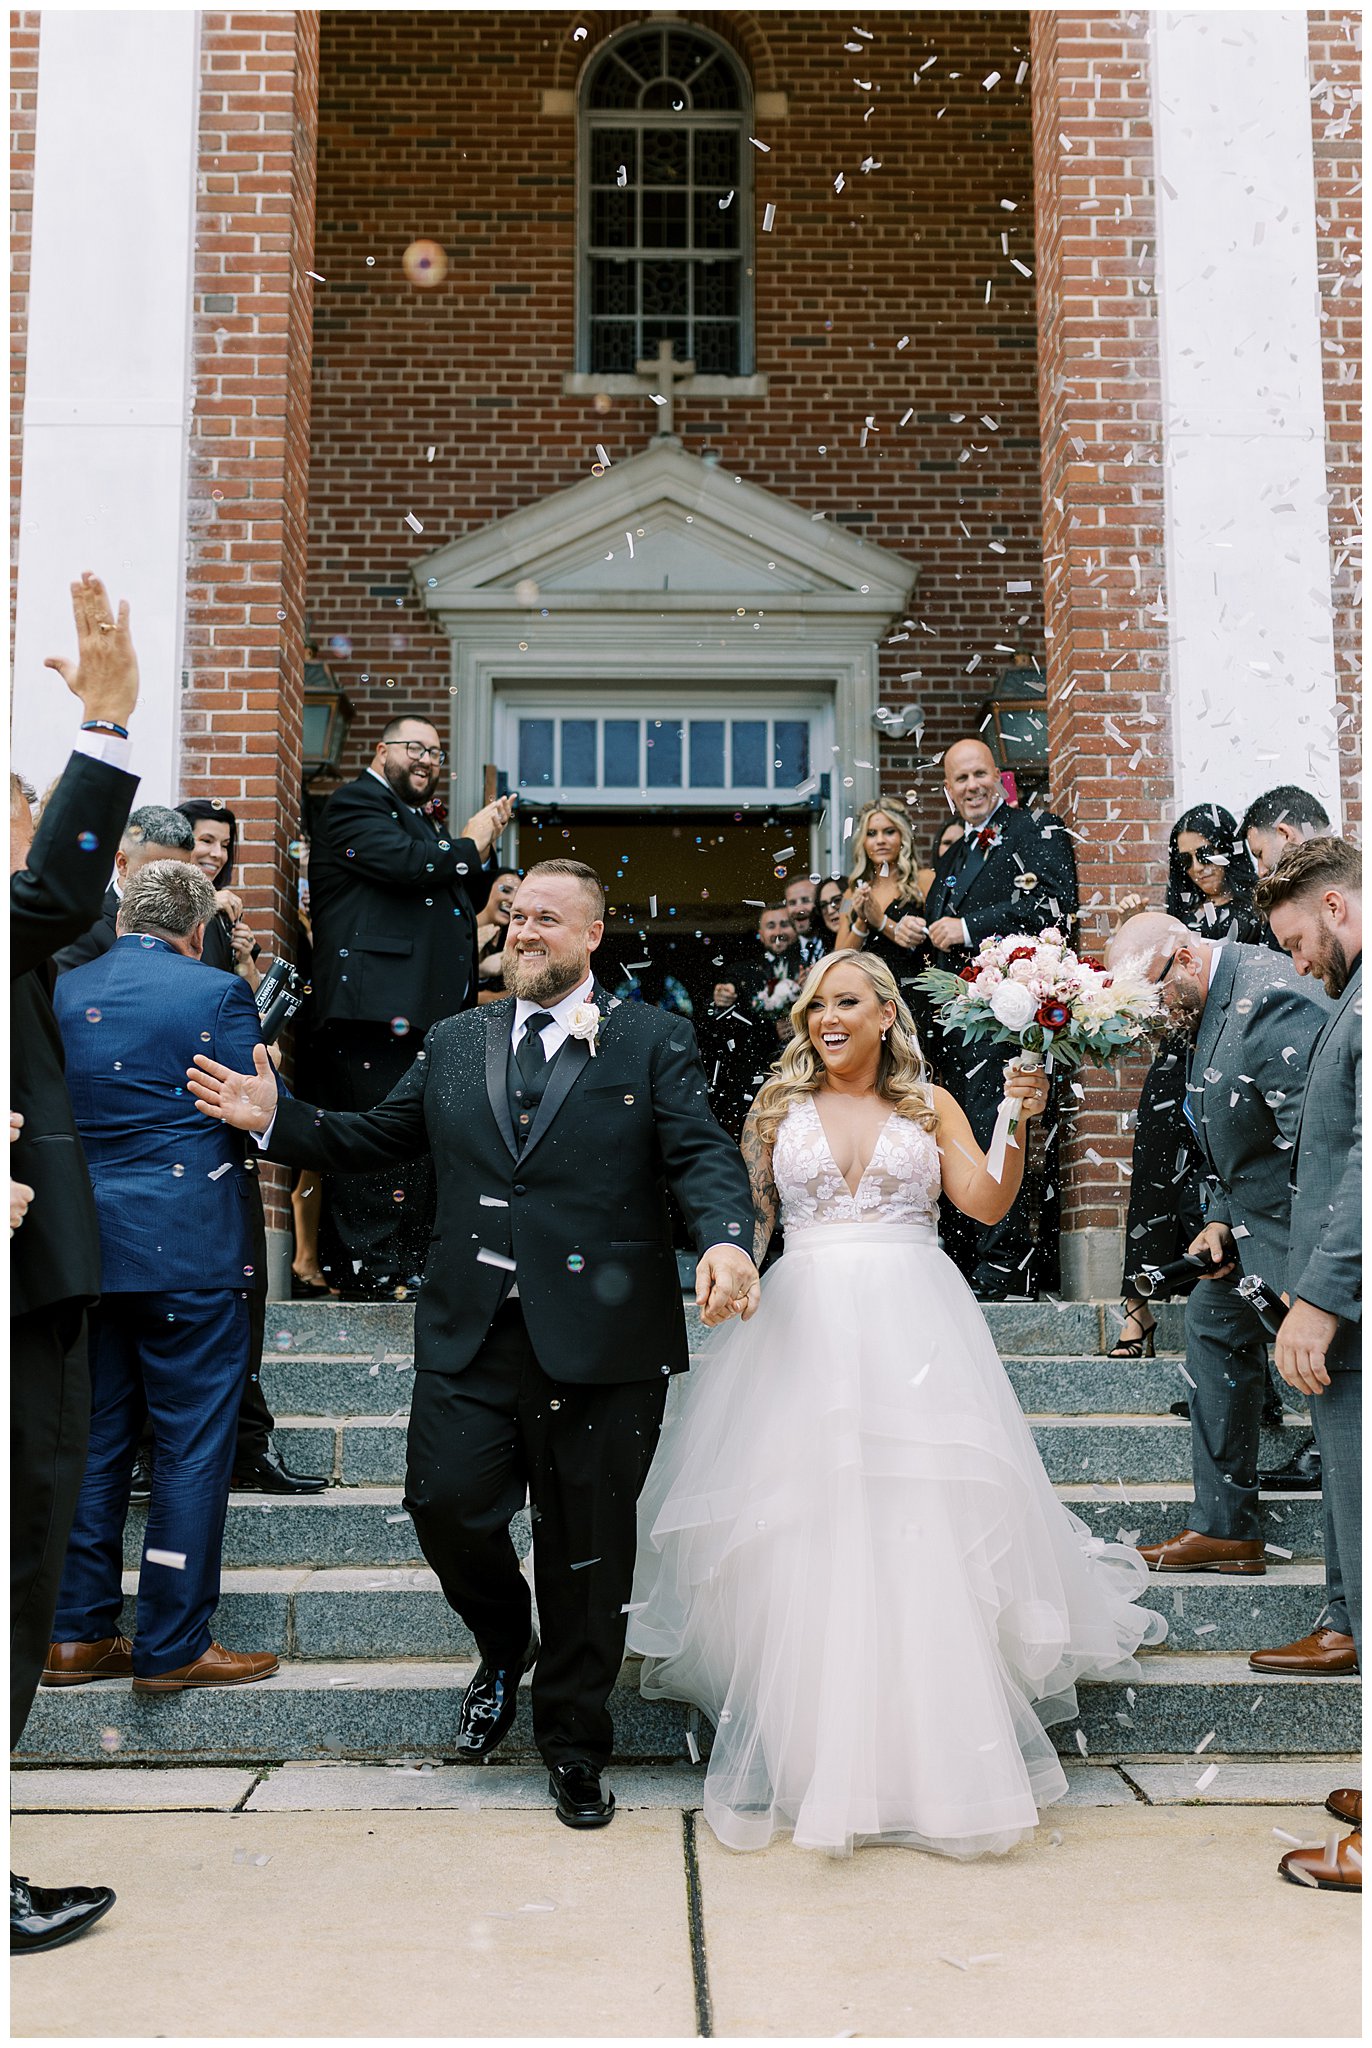 Confetti Pops as couple walks outside of church after wedding ceremony